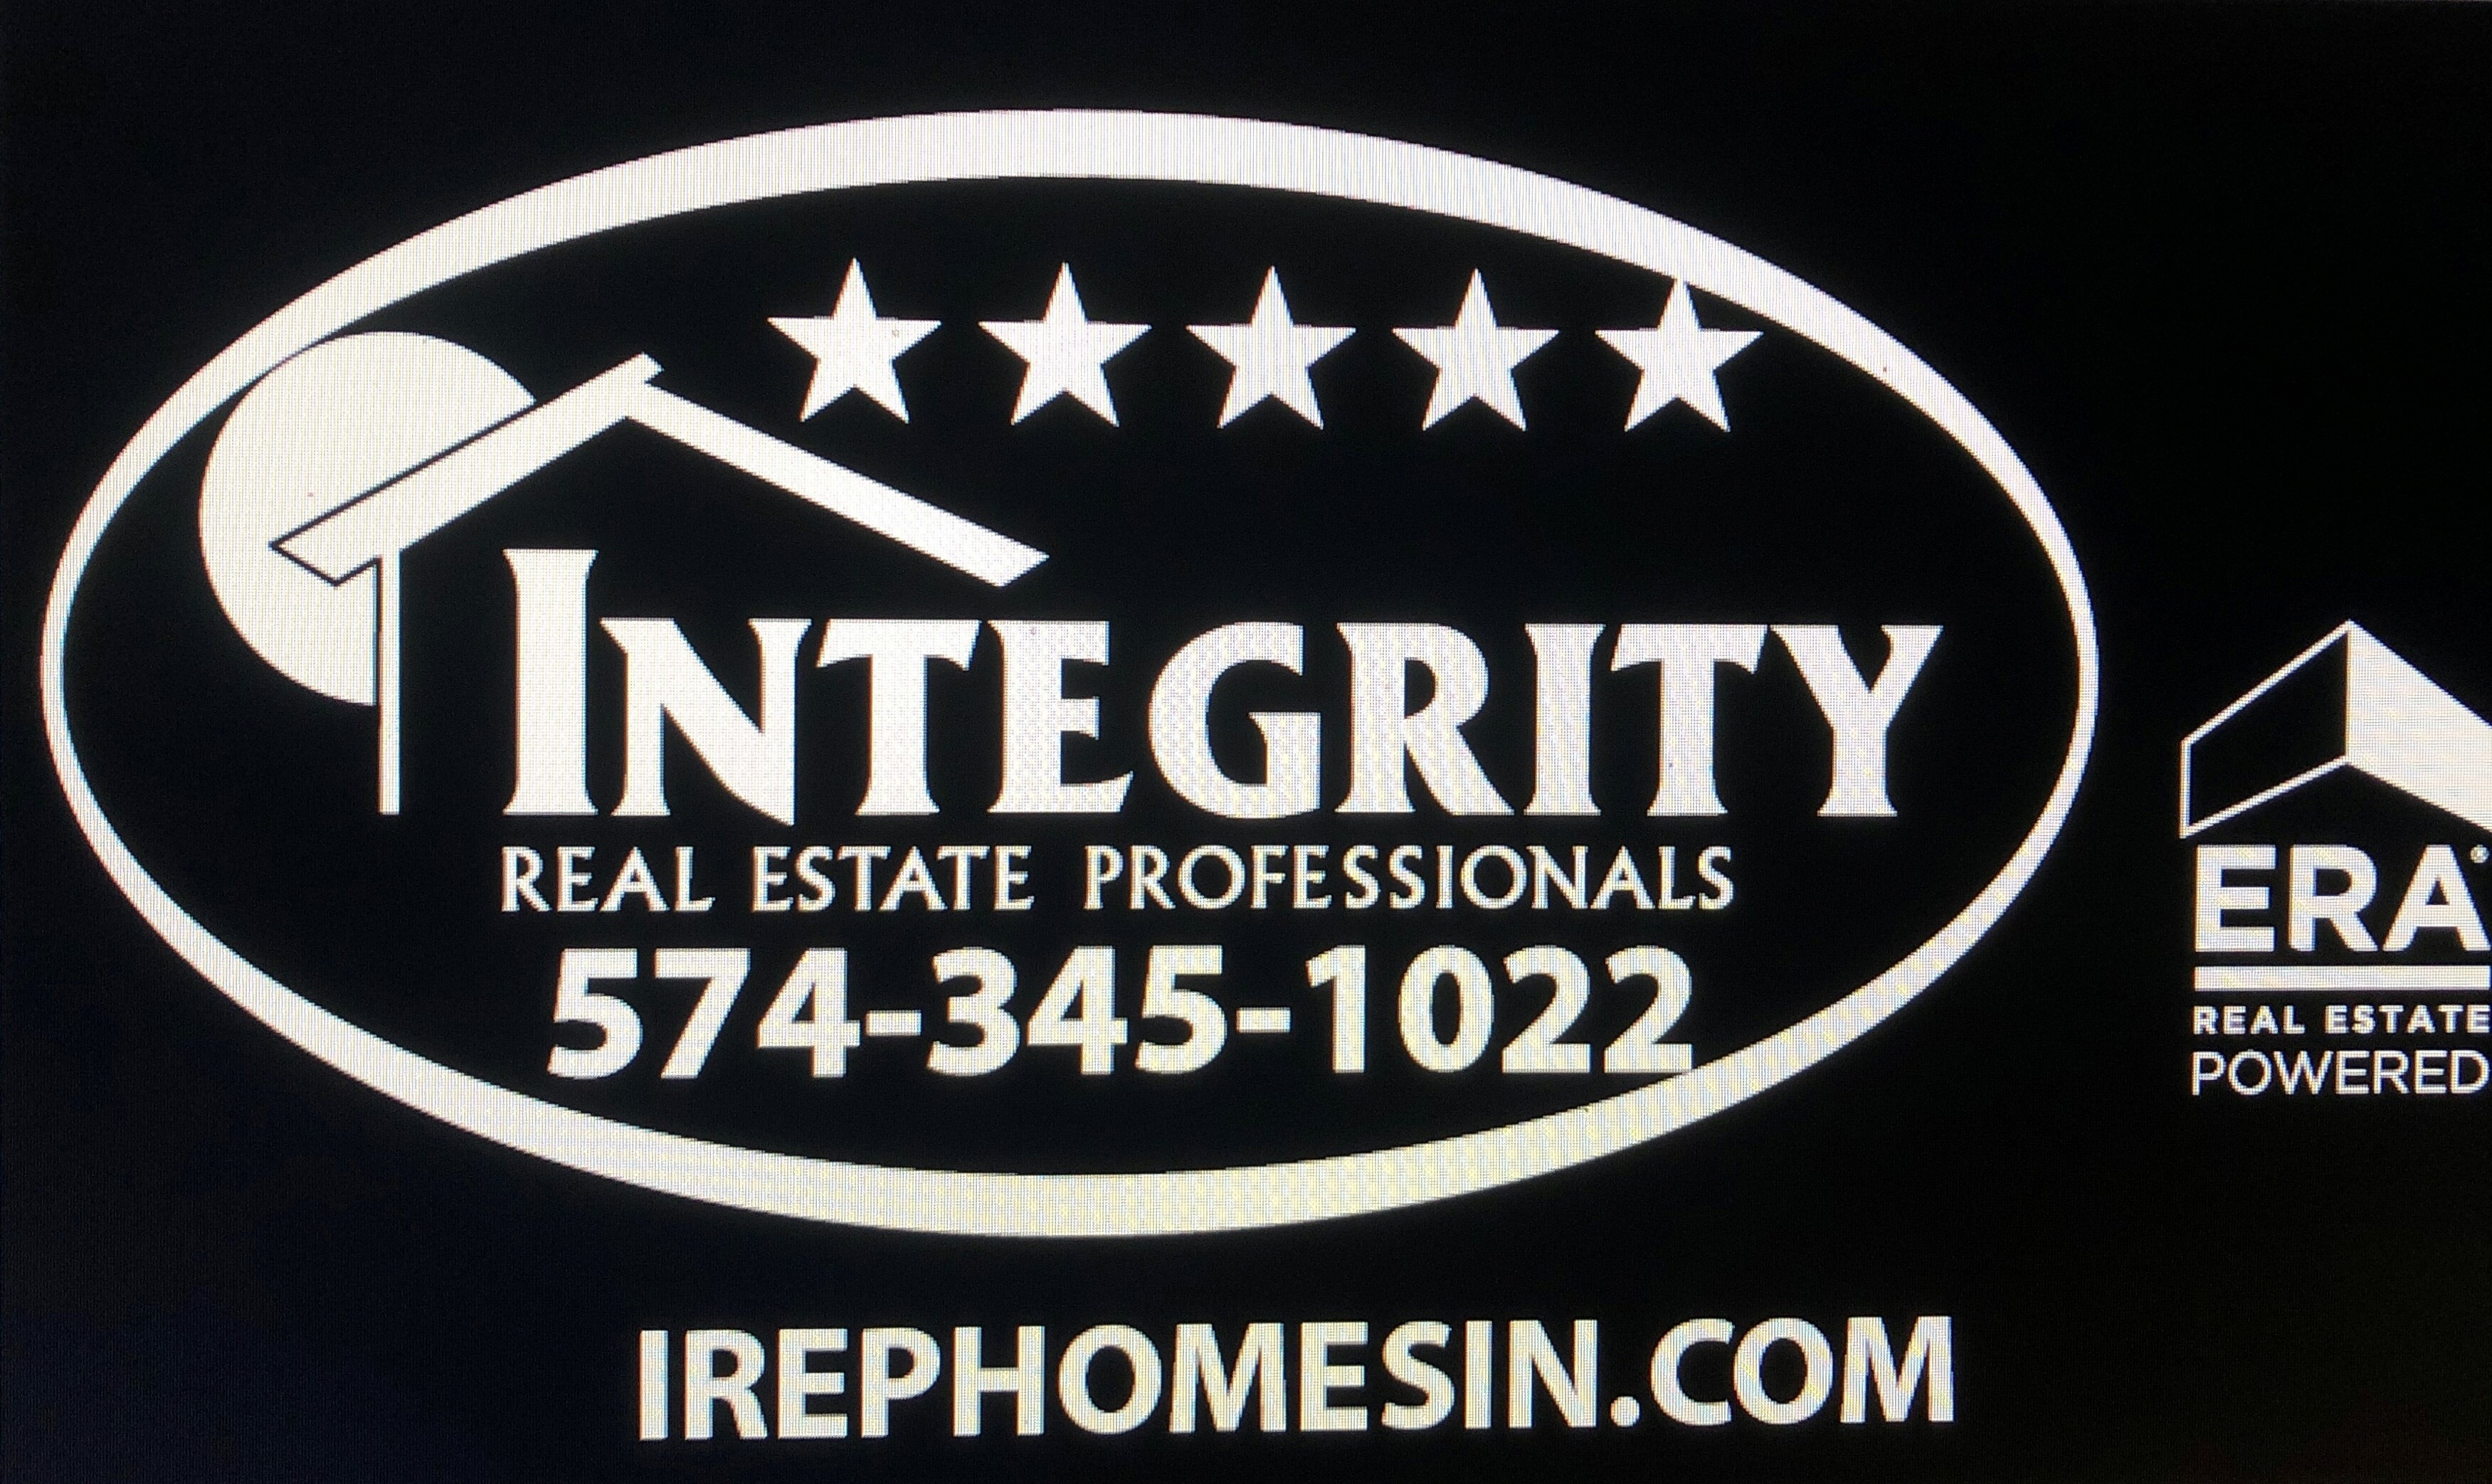 Integrity Real Estate Professionals ERA Powered,Granger,Integrity Real Estate Professionals Era Powered